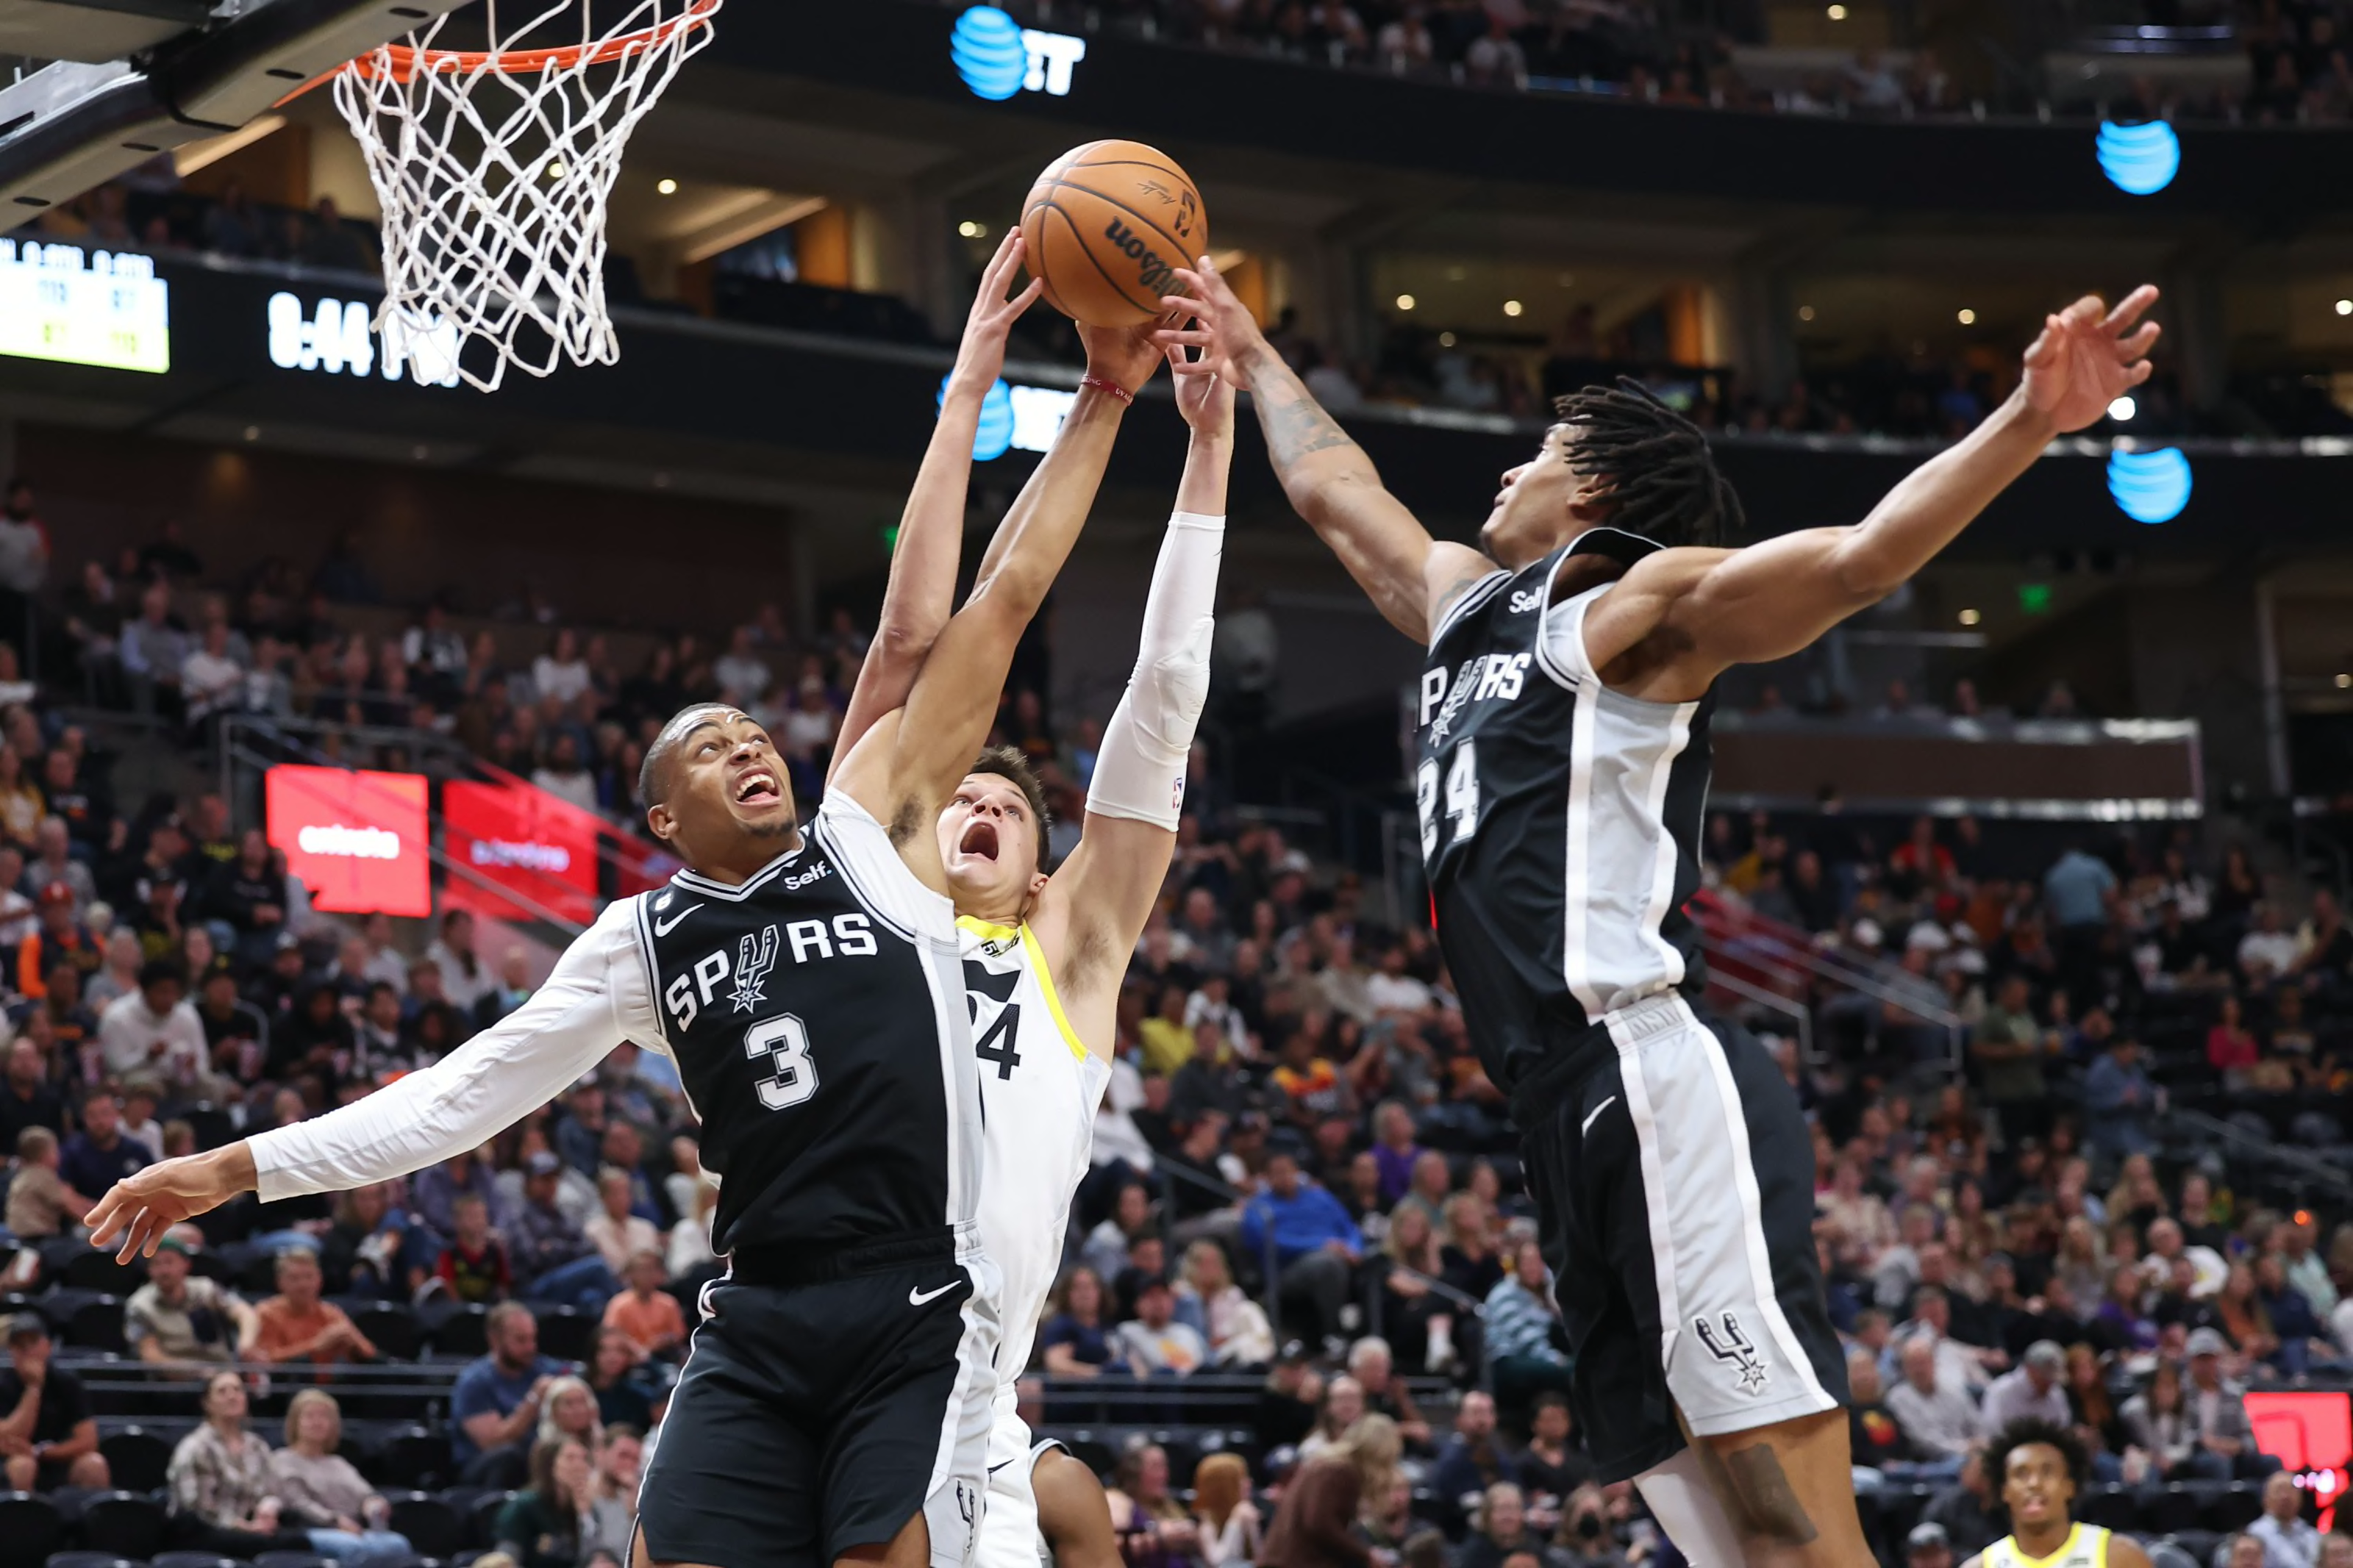 Don't look now, but the Spurs might have the next elite wing duo